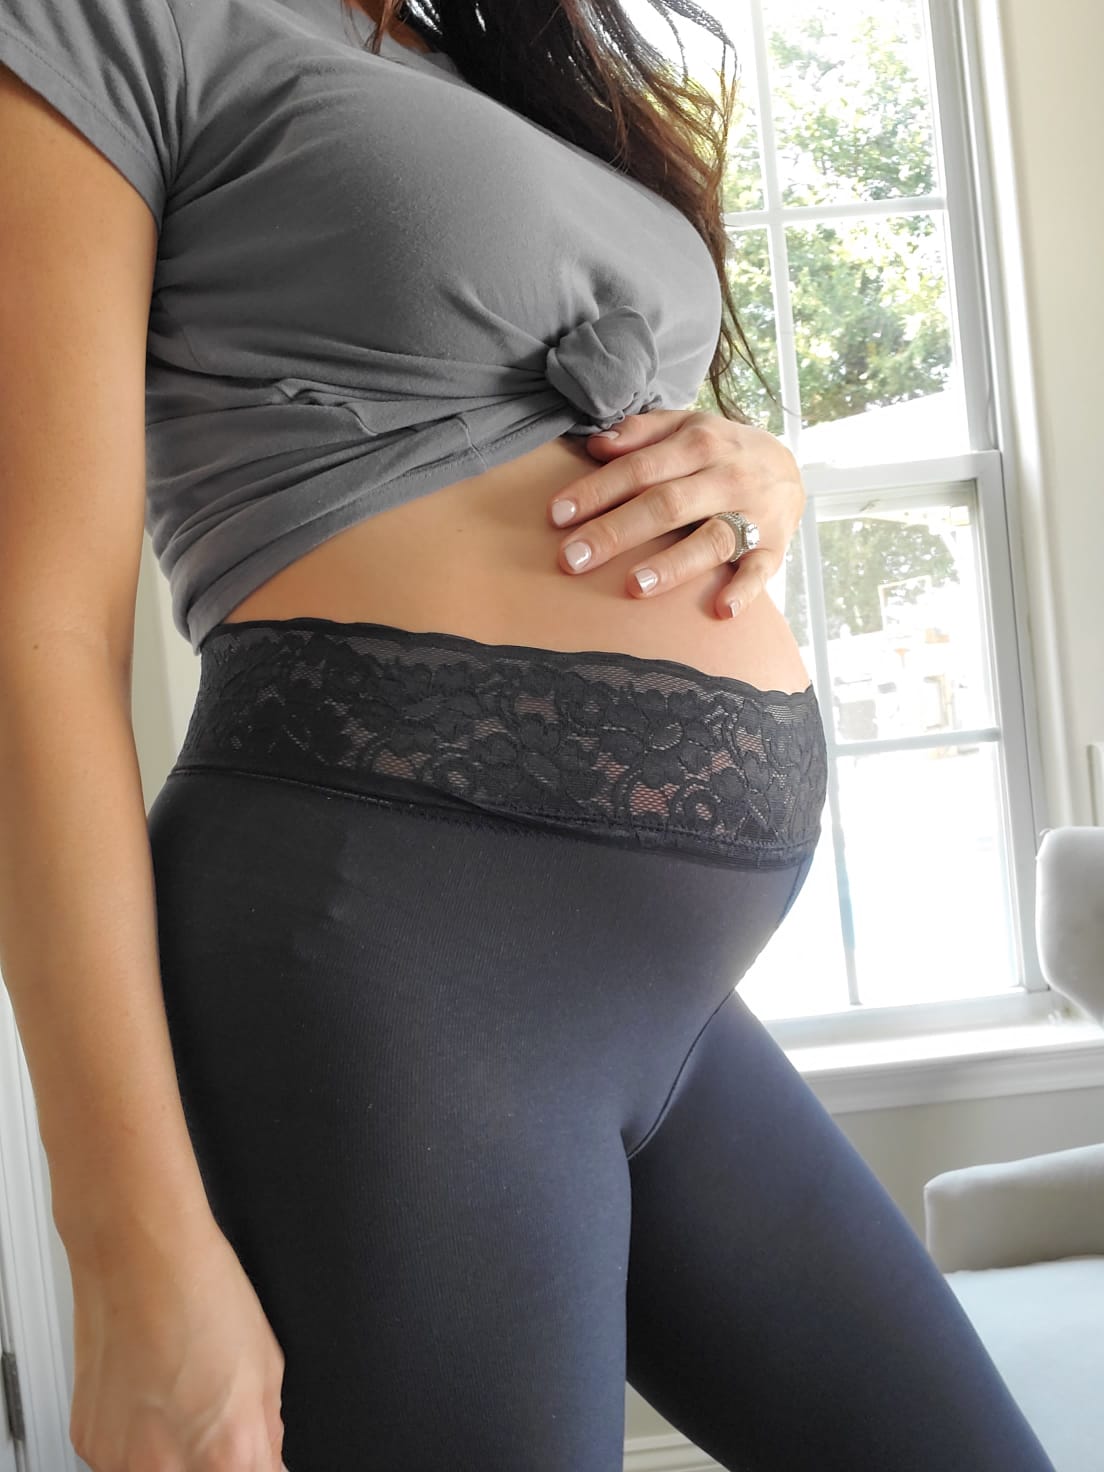 Best Maternity Tights - What to Look For?